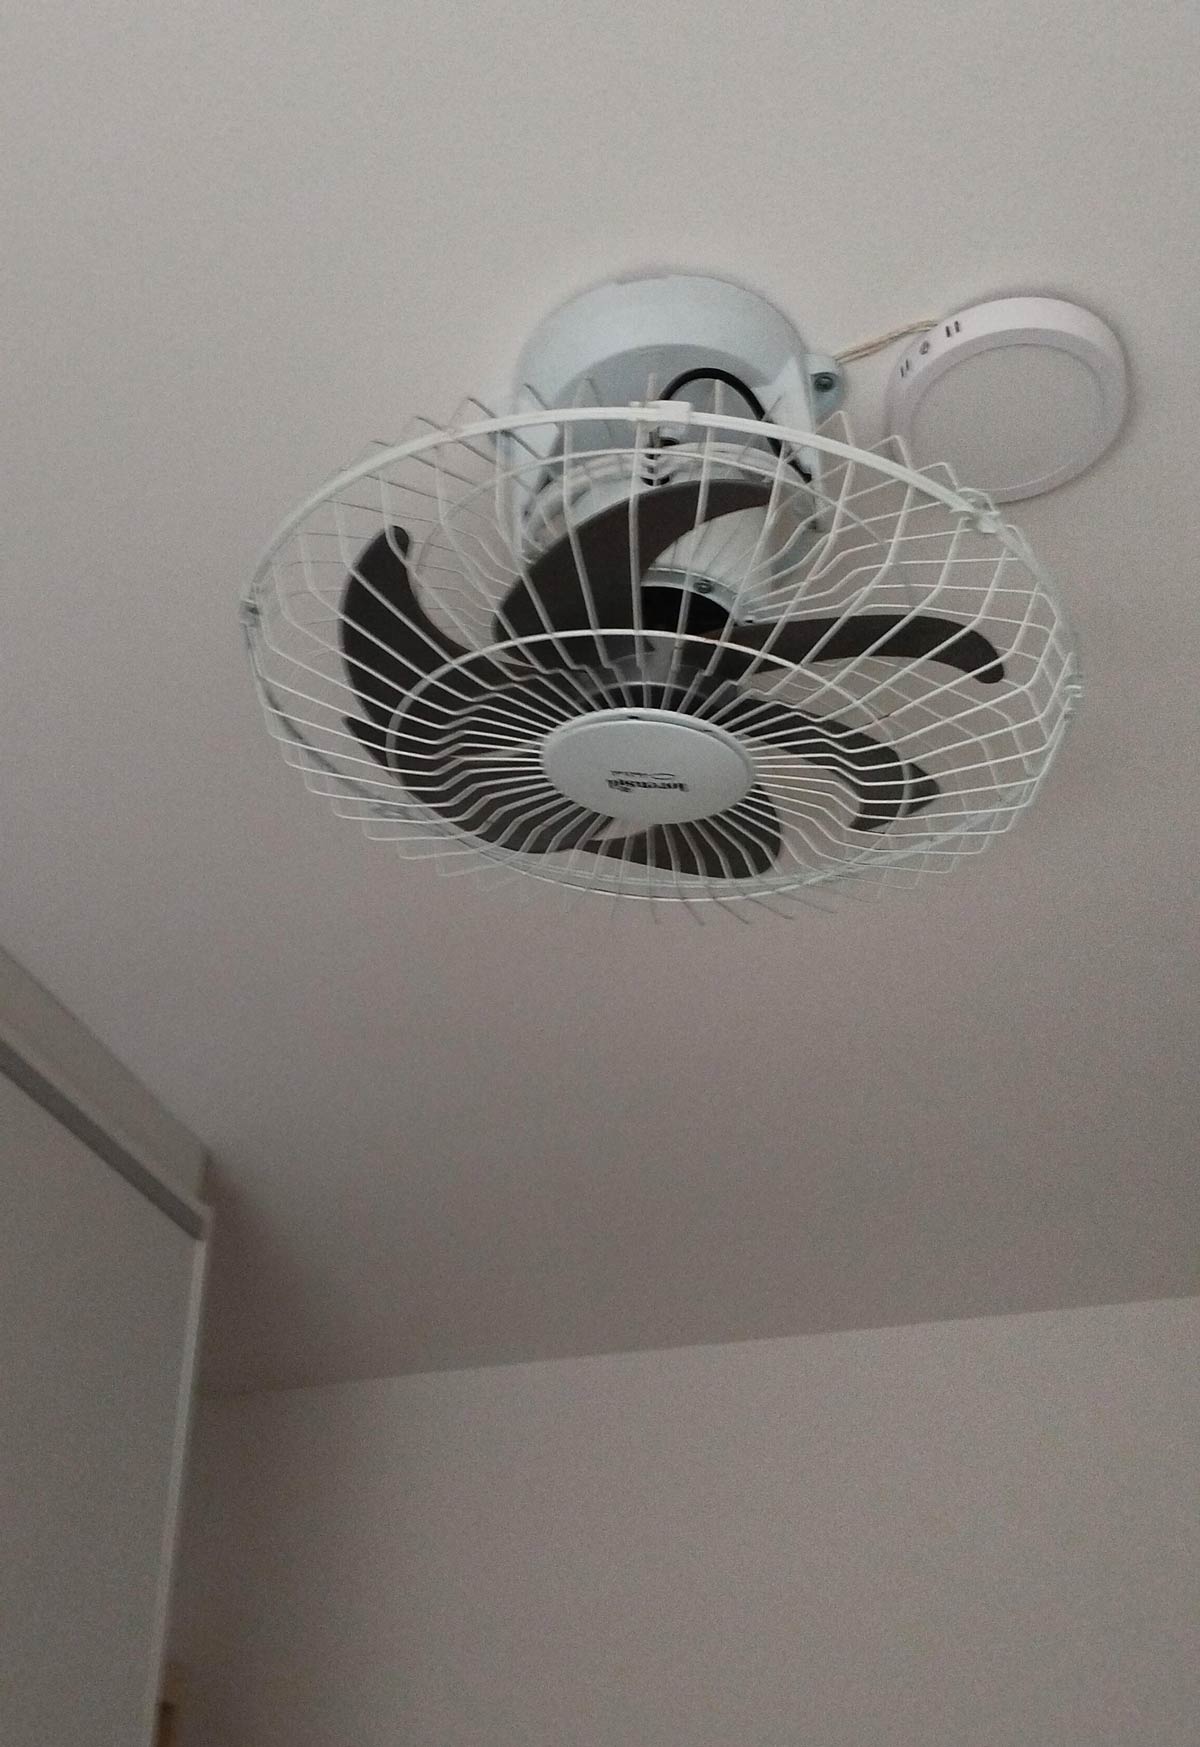 My grandpa said he had installed a ceiling fan. This is the picture he sent to us